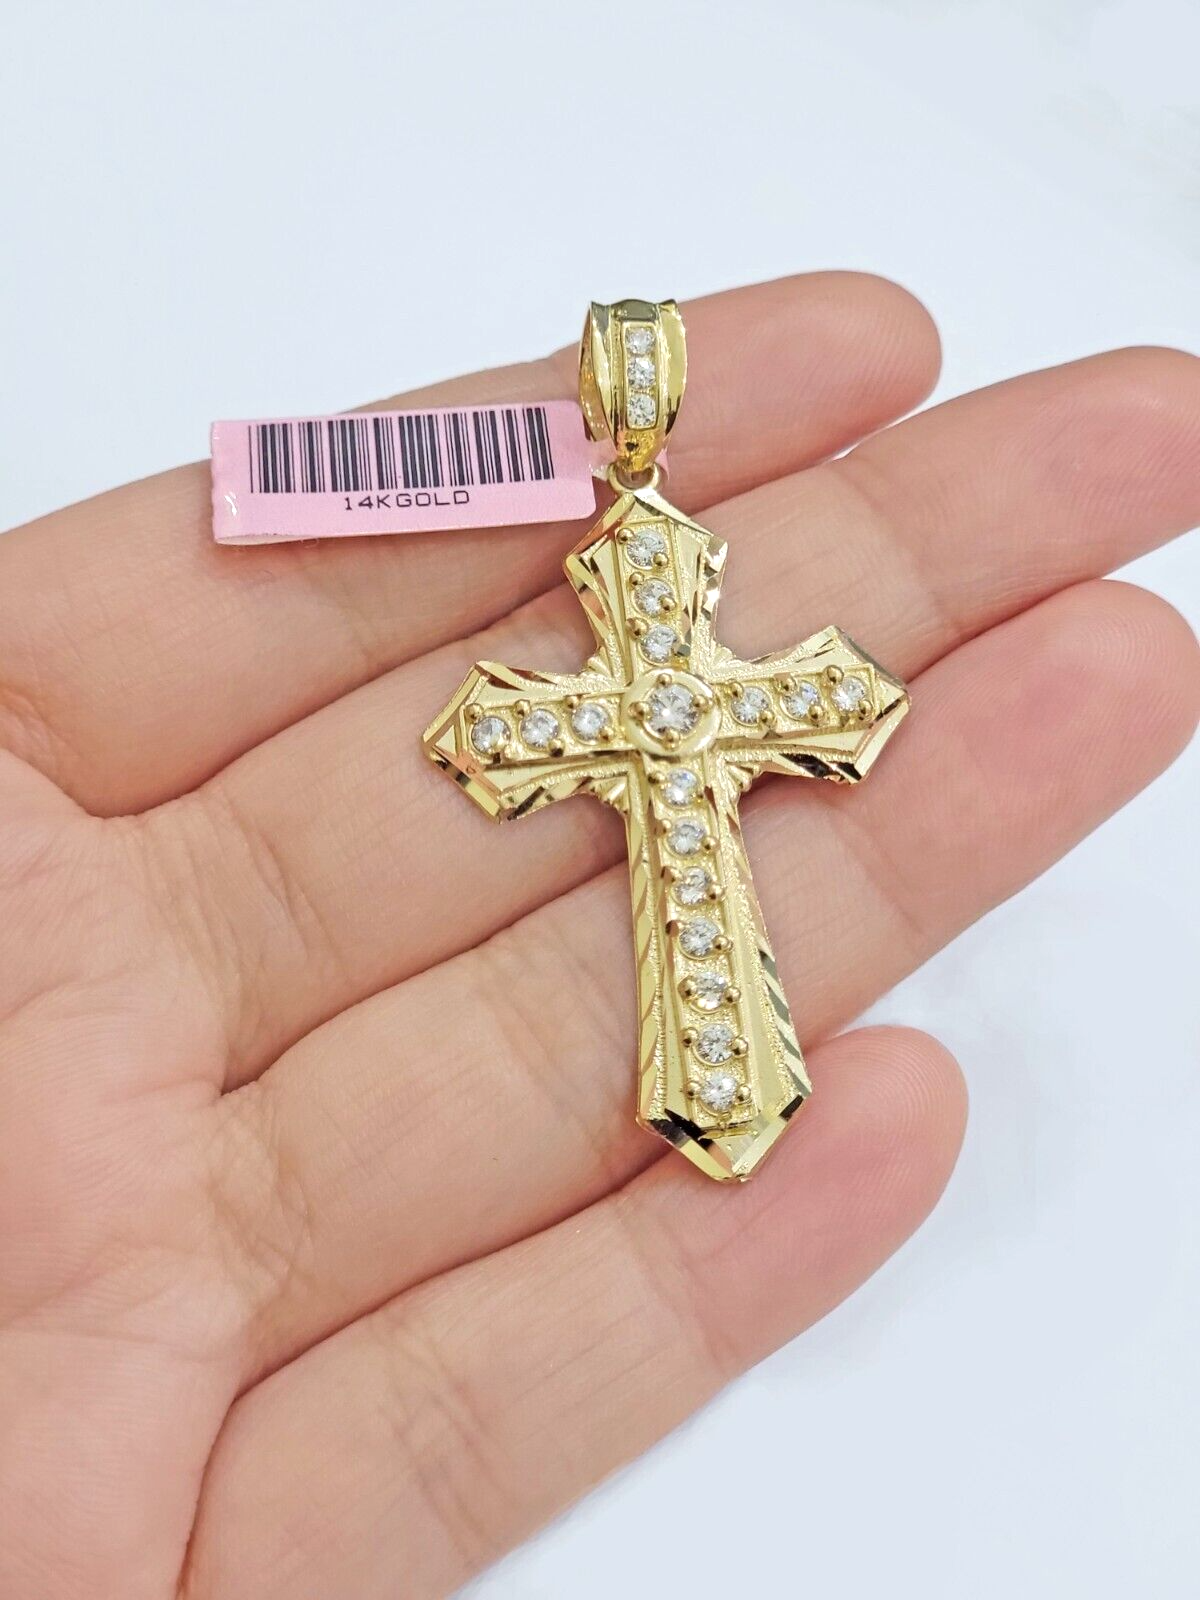 Real 14k Yellow Gold Cross Charm Pendant 2 Inch Diamond Cuts CZ Charm For Chains